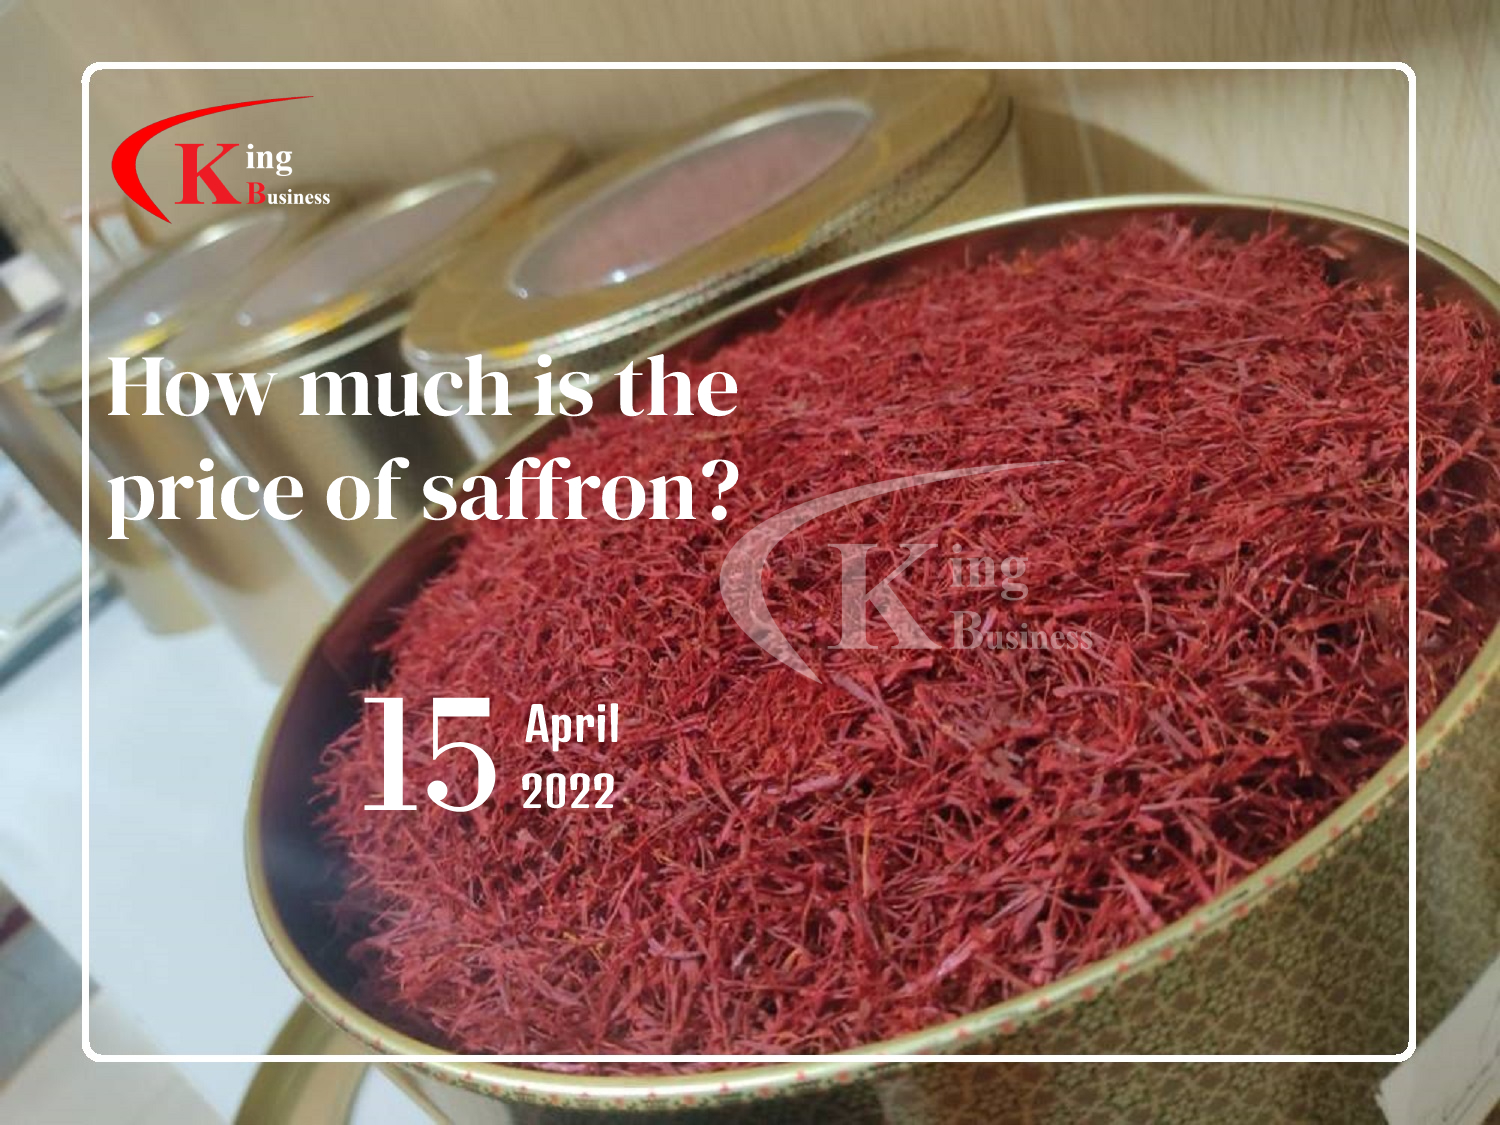 What is the profit from saffron harvest per hectare